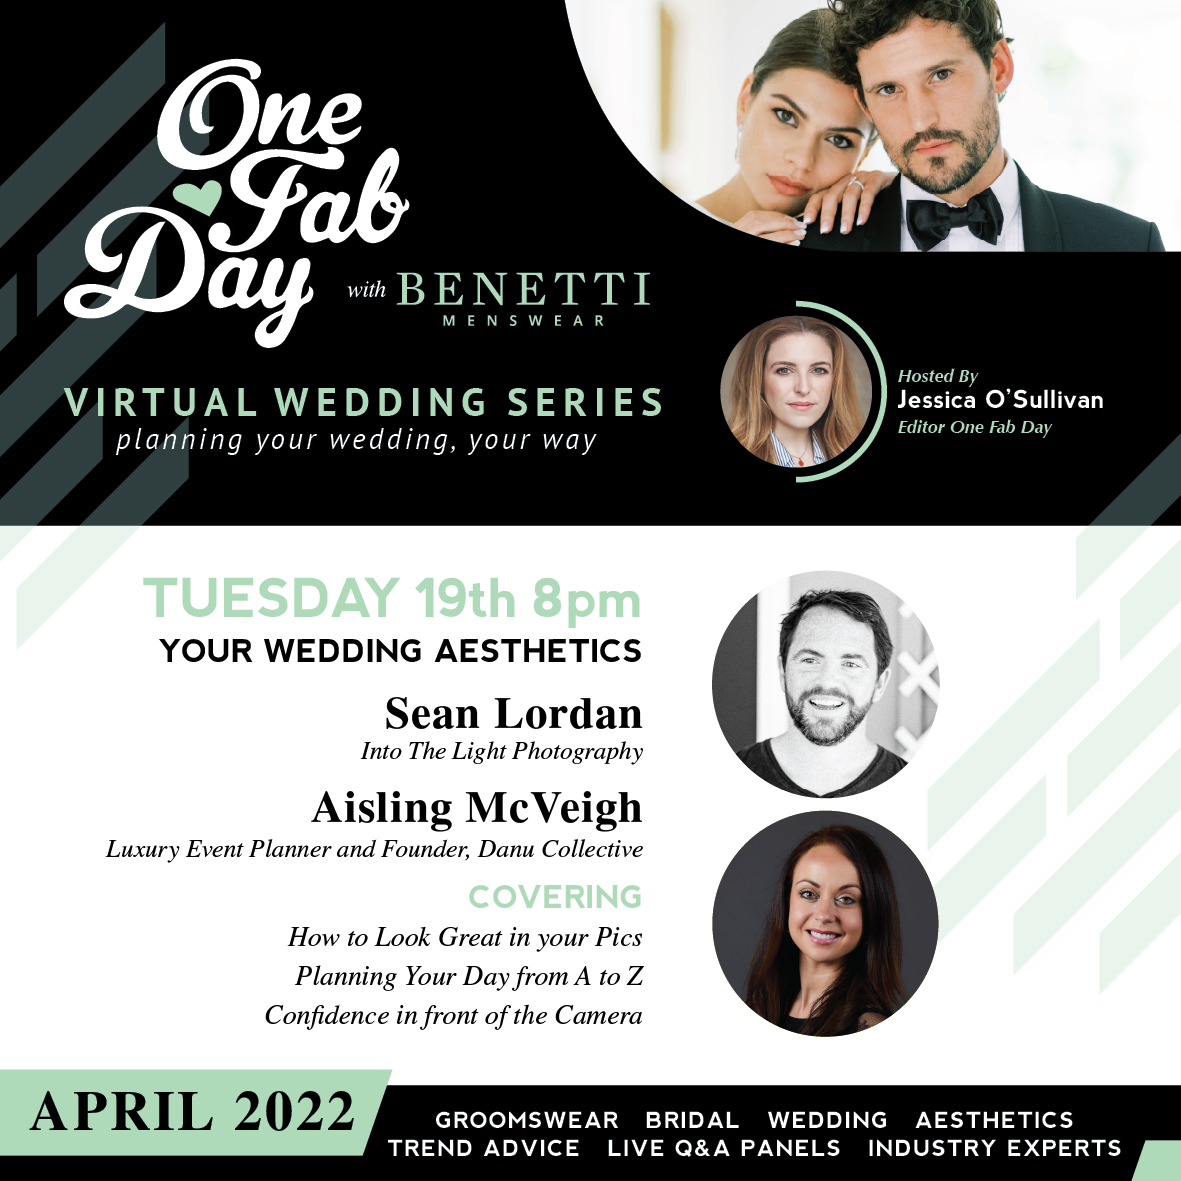 💖 What's coming up on our Virtual Wedding Series on Tuesday 19th! ✨ Talk will turn to Your Wedding Aesthetics, from choosing the right suppliers to the concept and look of your wedding. ✨Sign up here: onefabday.com/one-fab-day-vi…